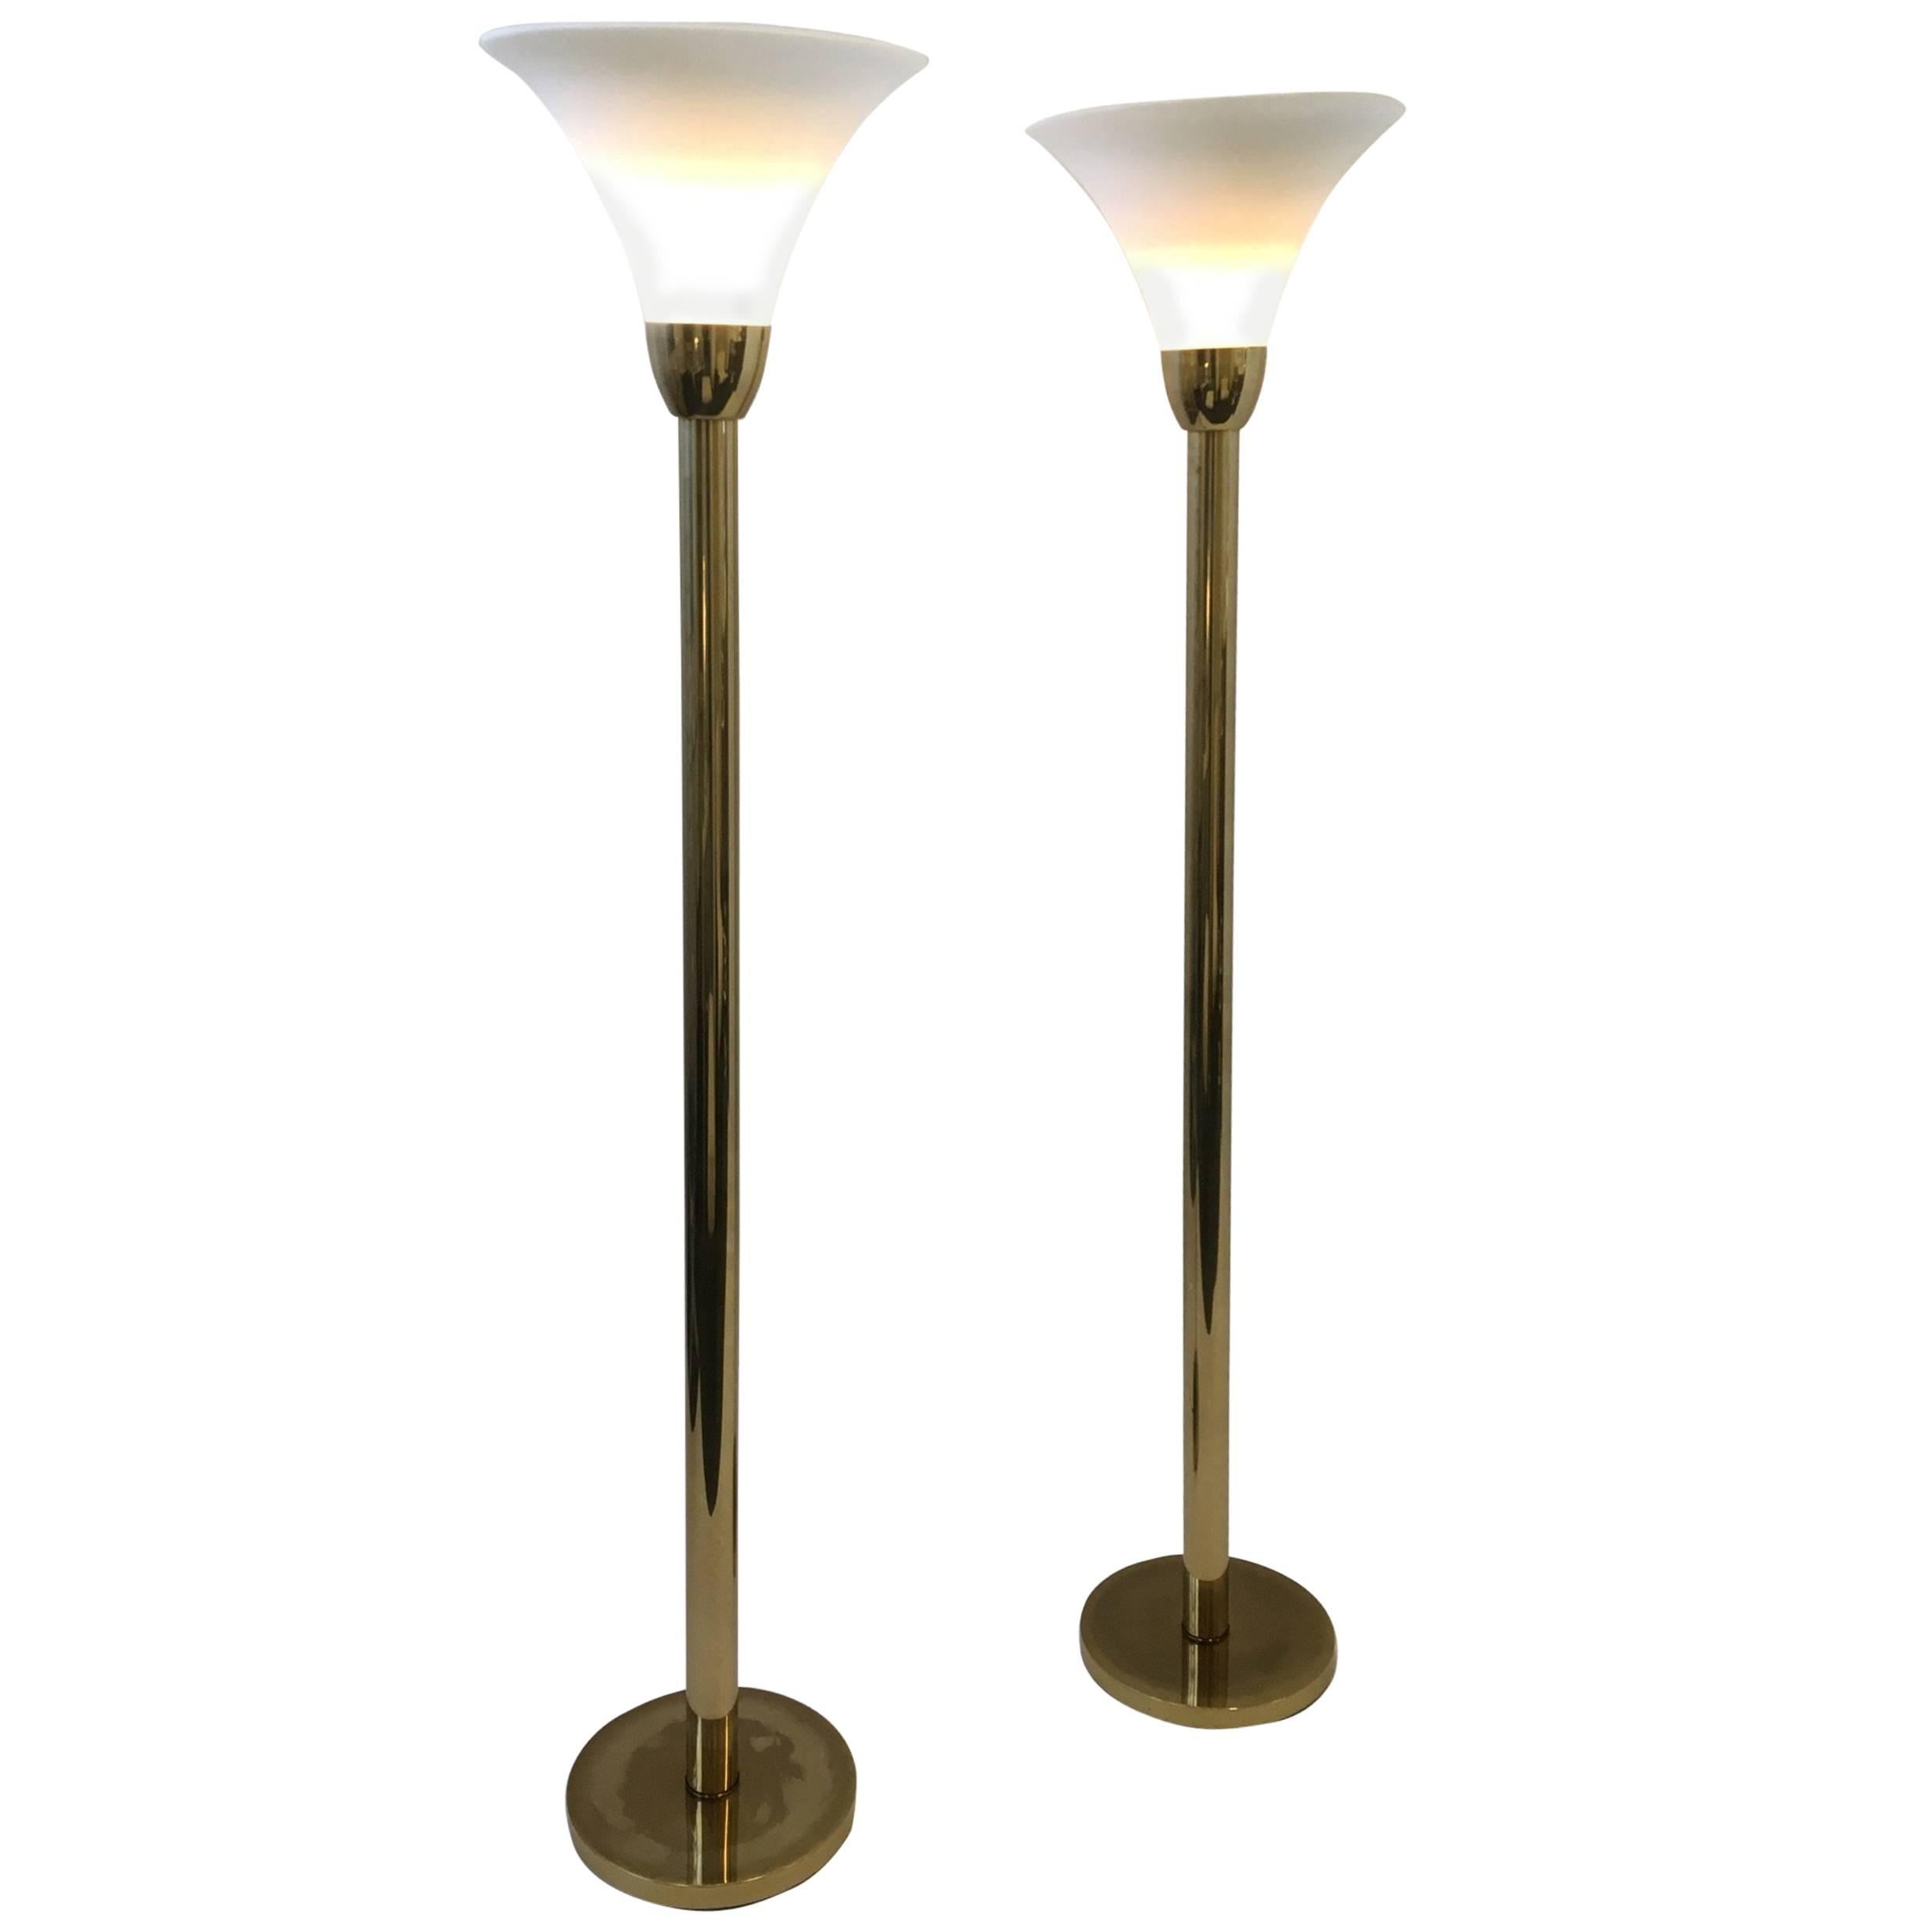 Rare Pair of Brass and Frosted Glass Torchiere by Nessen Studios